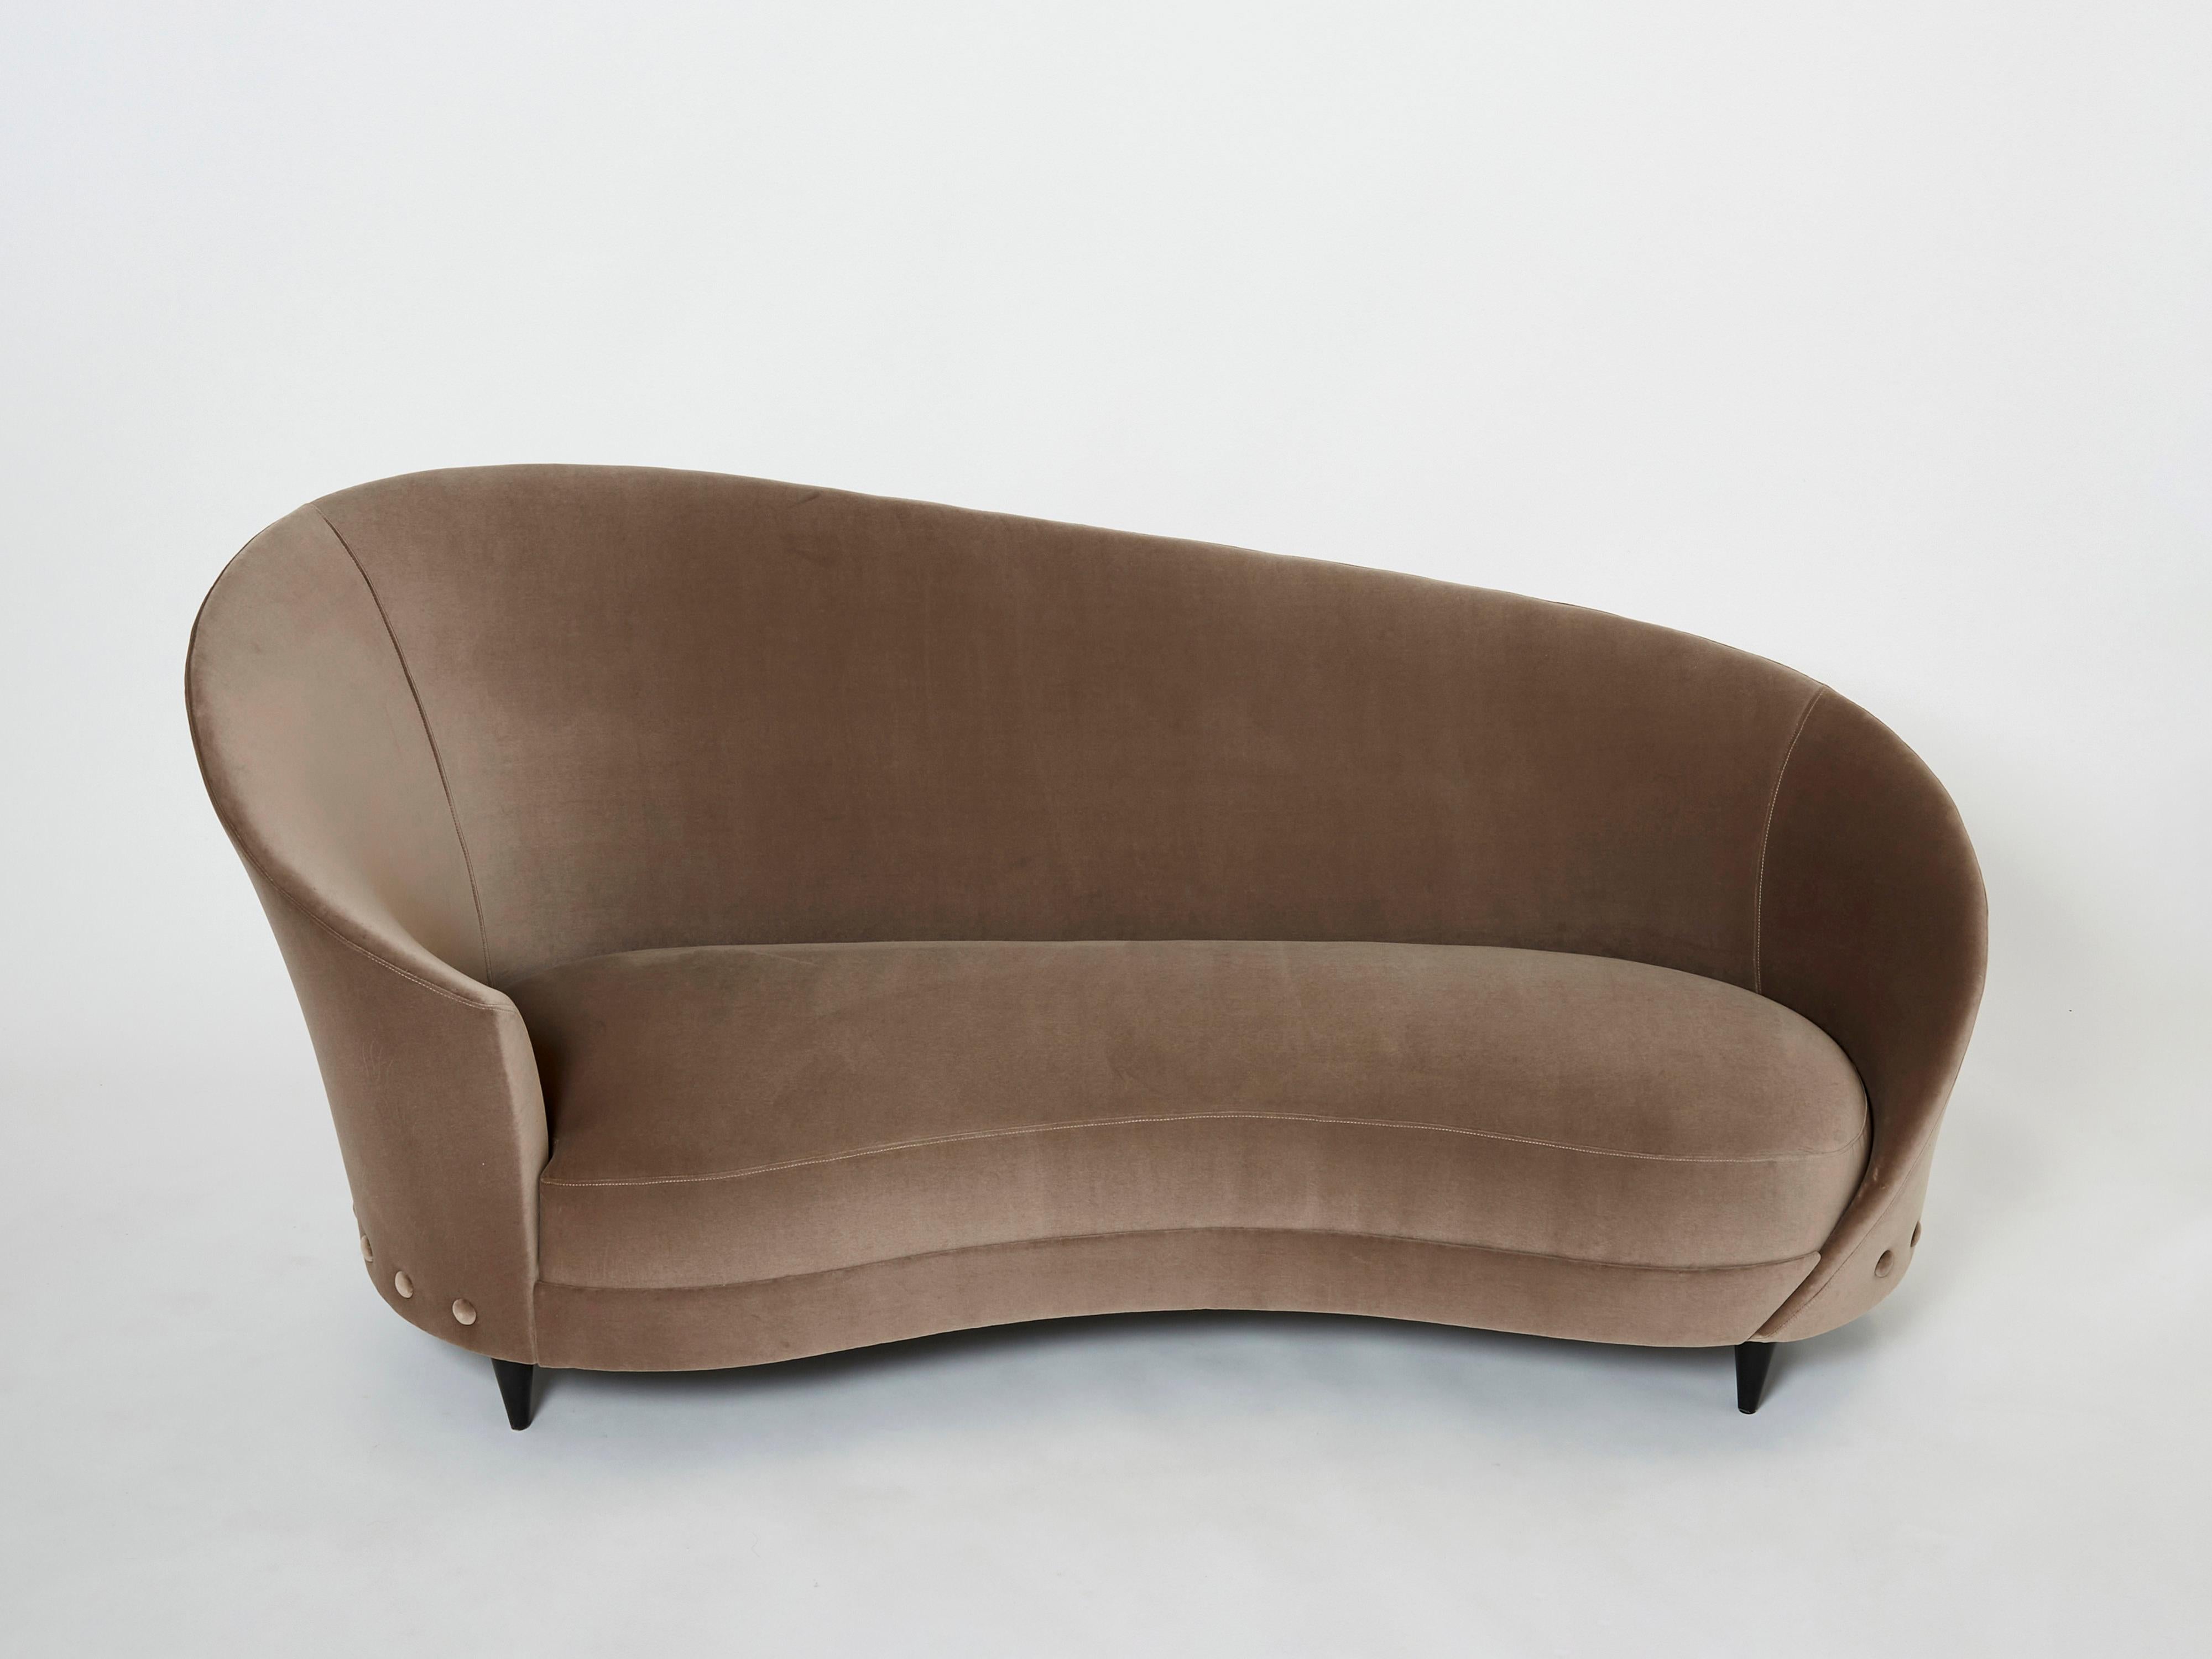 The rounded, sloped back gives this piece a jolt of Italian midcentury glamour. Designed by Federico Munari in Italy in the 1960s, the sofa seems to belong in some glitzy boudoir. It’s been fully restored and reupholstered with a smoky taupe velvet